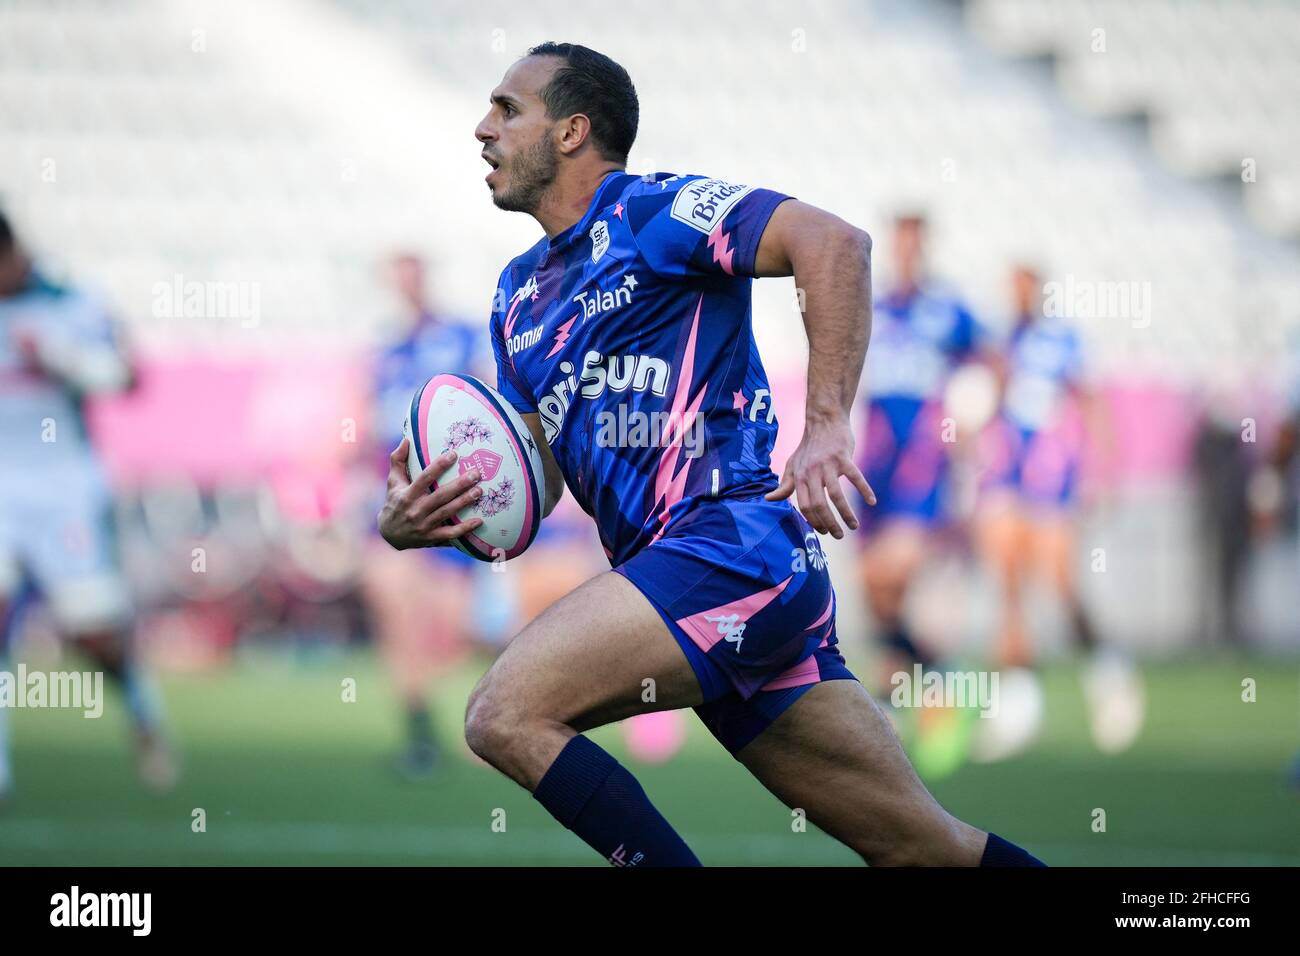 Parisâ€™s Kylian Hamdaoui during the rugby TOP 14 match between Stade  Français Paris (SFP) and Section Paloise (SP) at the Jean Bouin Stadium, in  Paris, France on April 24, 2021. Photo by